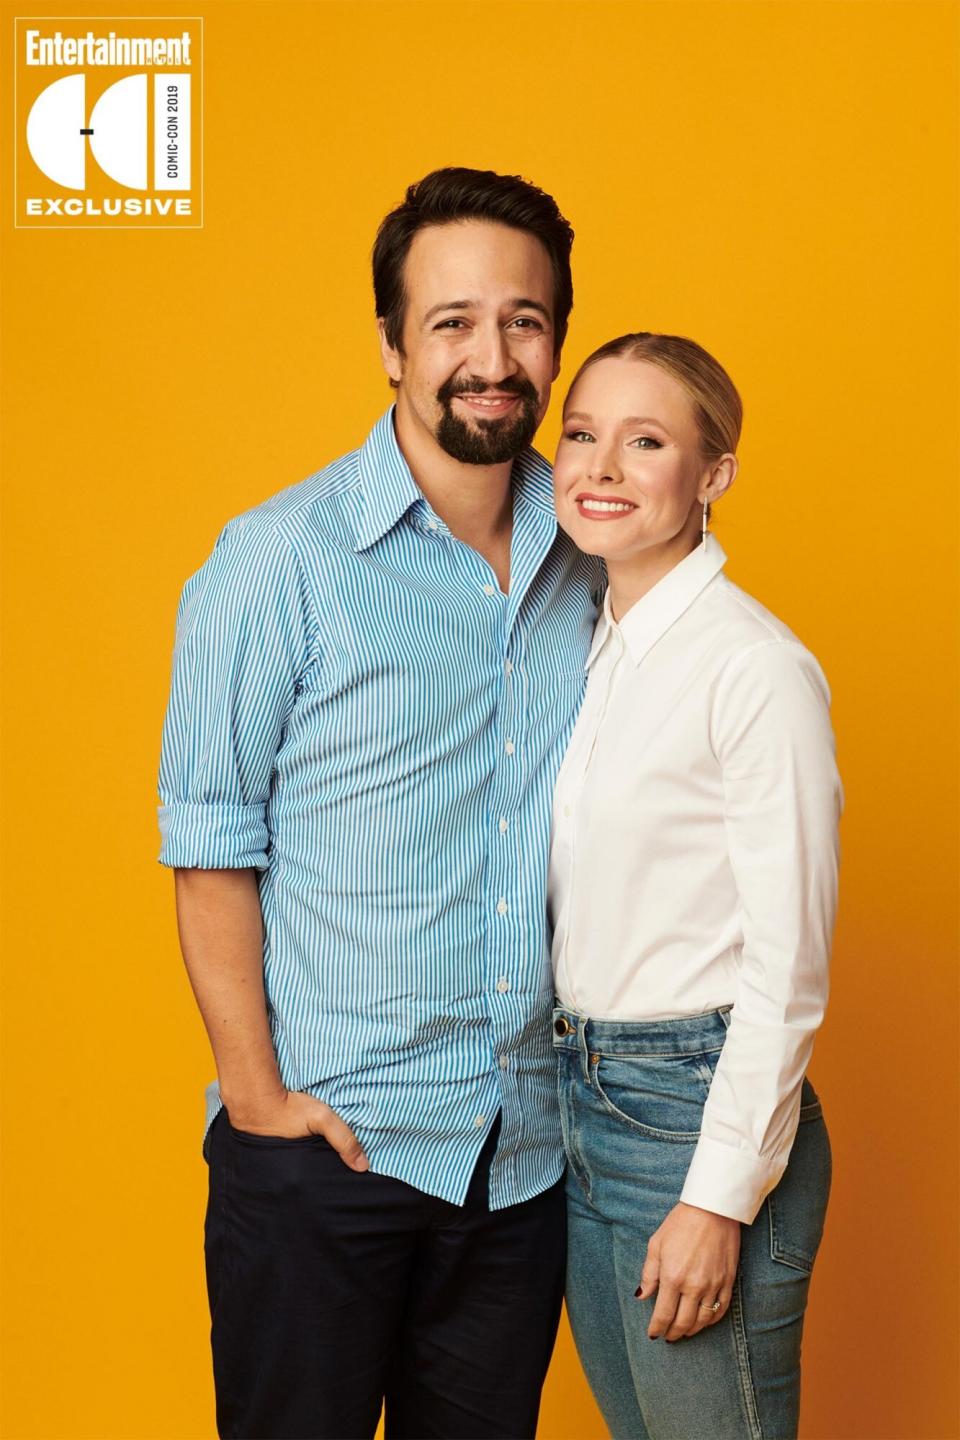 Day 1 - 2019 SDCC - San Diego Comic-con Lin-Manuel Miranda and Kristen Bell photographed in the Entertainment Weekly portrait studio during the 2019 San Diego Comic Con on July 18th, 2019 in San Diego, California. Photographed by: Eric Ray Davidson Pictured: Lin-Manuel Miranda and Kristen Bell